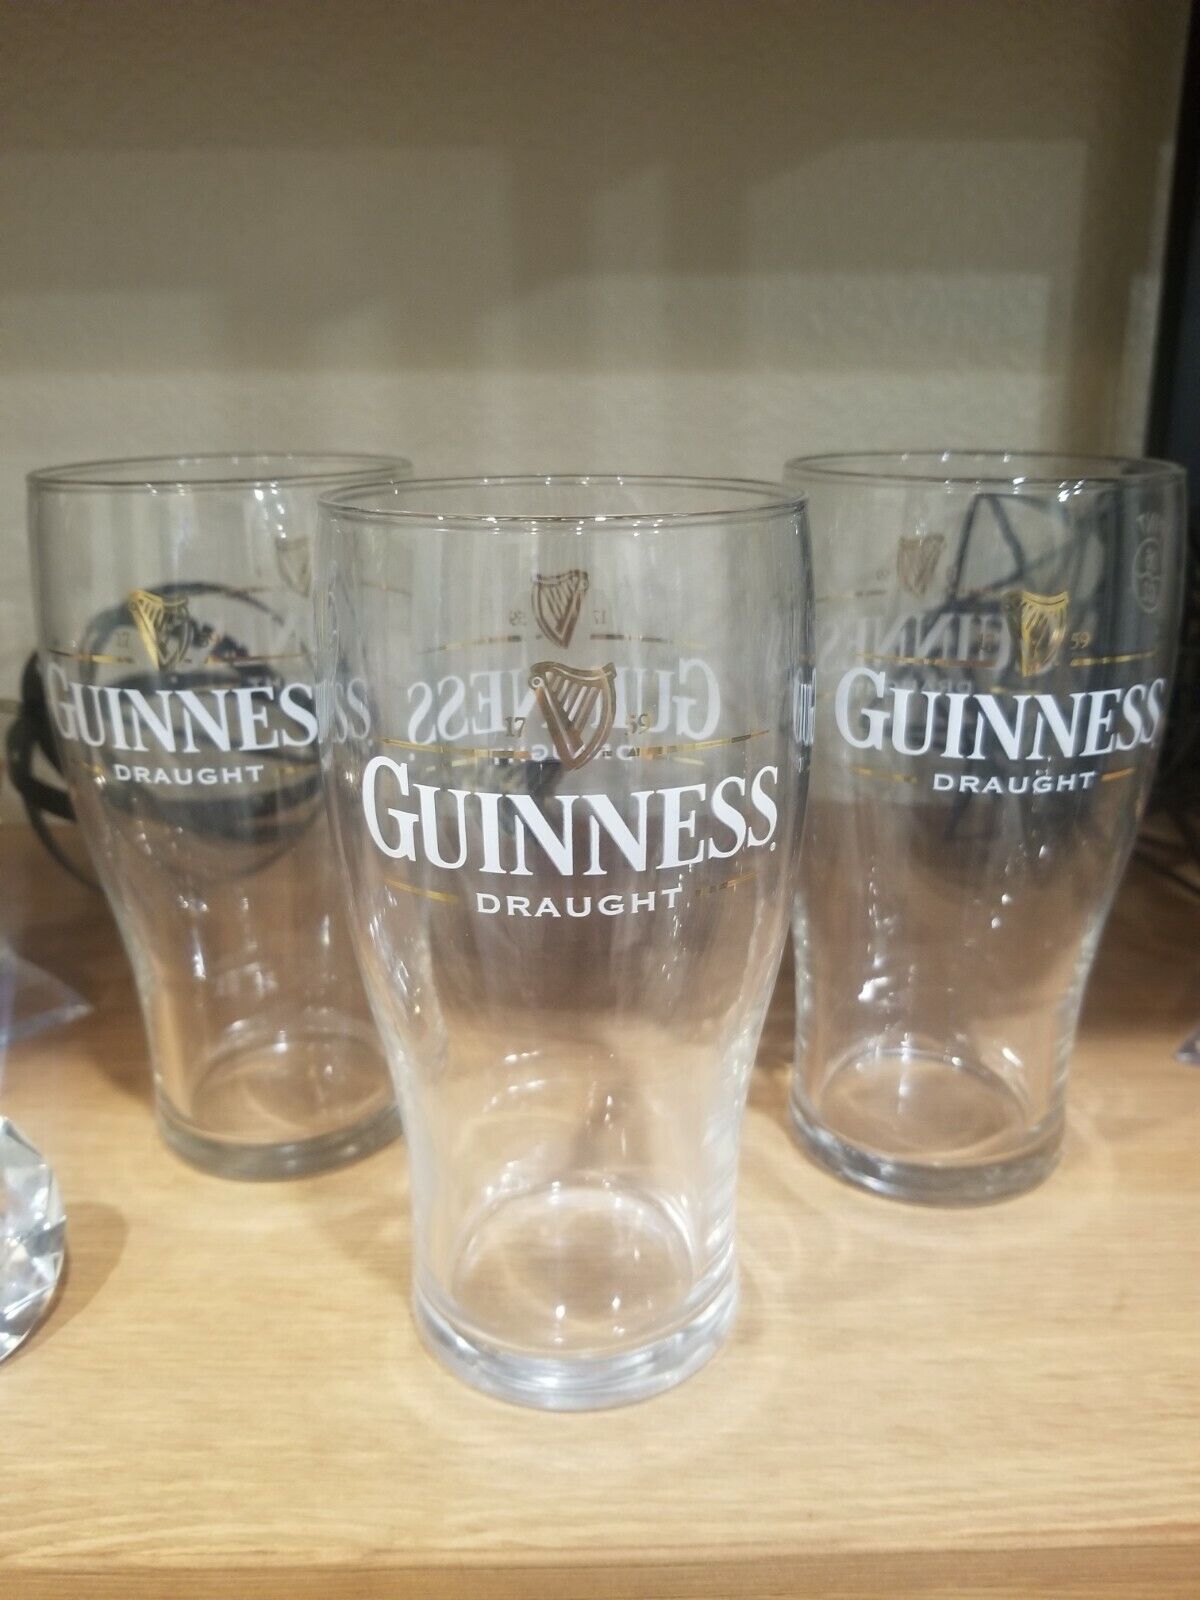 Guinness Draught 1759 Beer Glass Collectible, 16 oz.